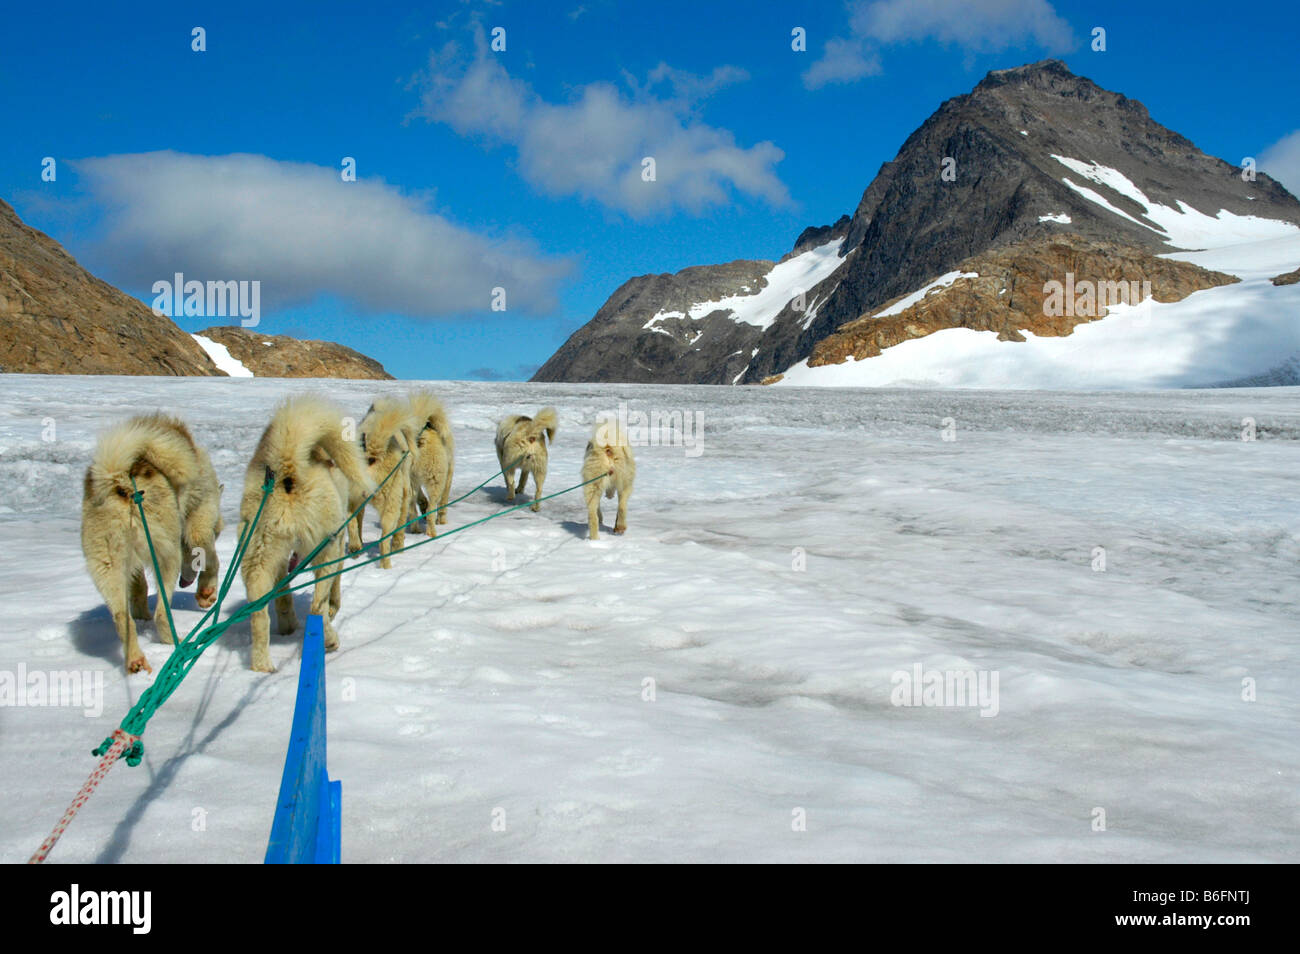 Sled dogs, Huskies in their harnesses, Apusiak Glacier, East Greenland, Arctic Stock Photo